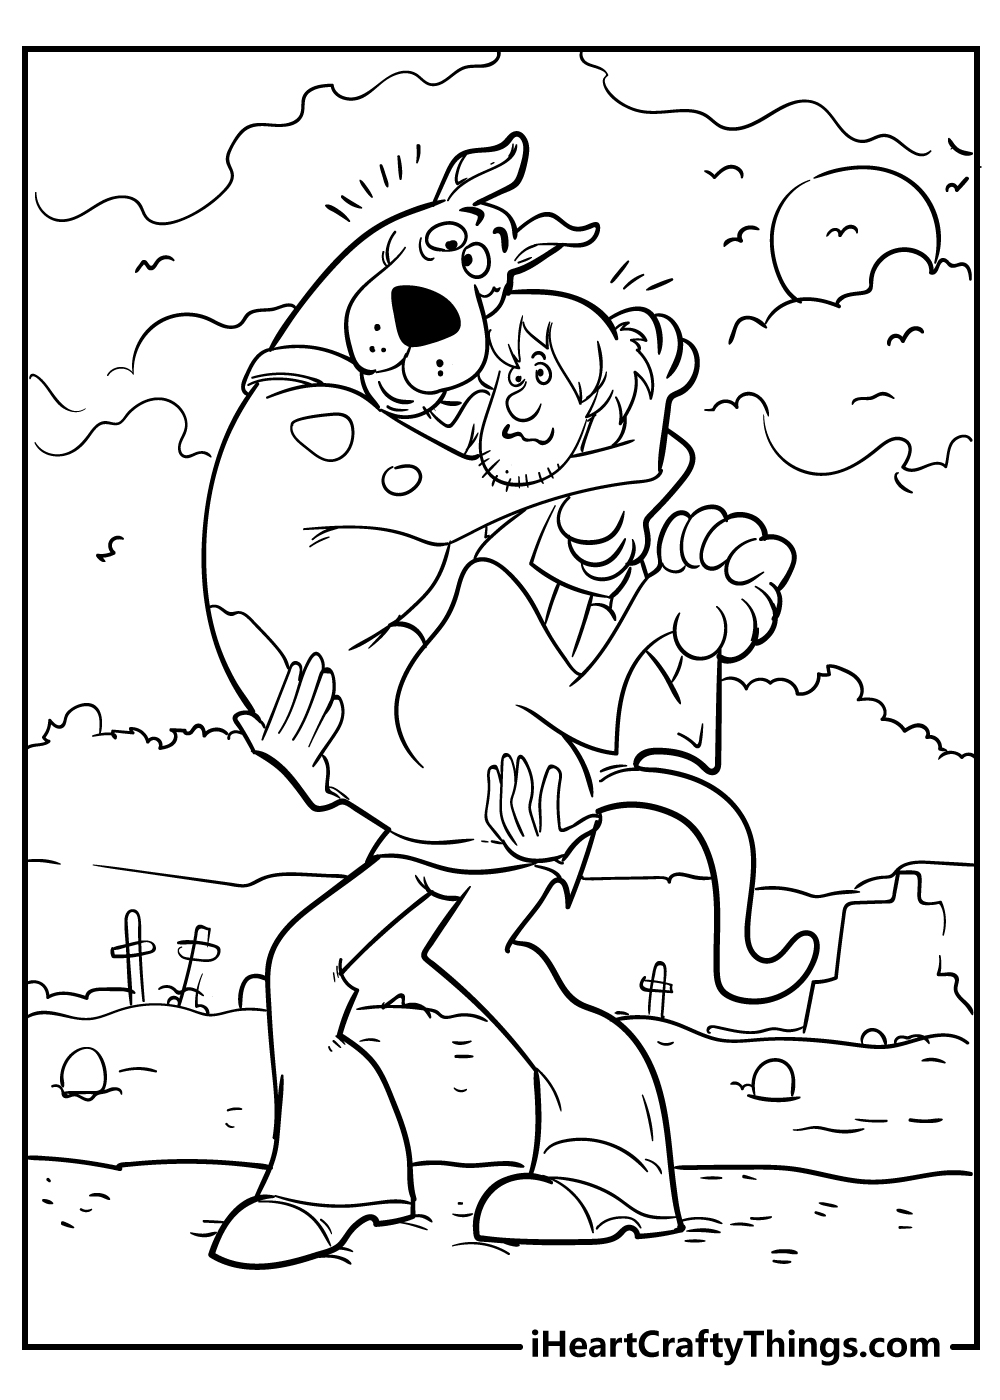 Scooby Doo Coloring Pages Updated 20